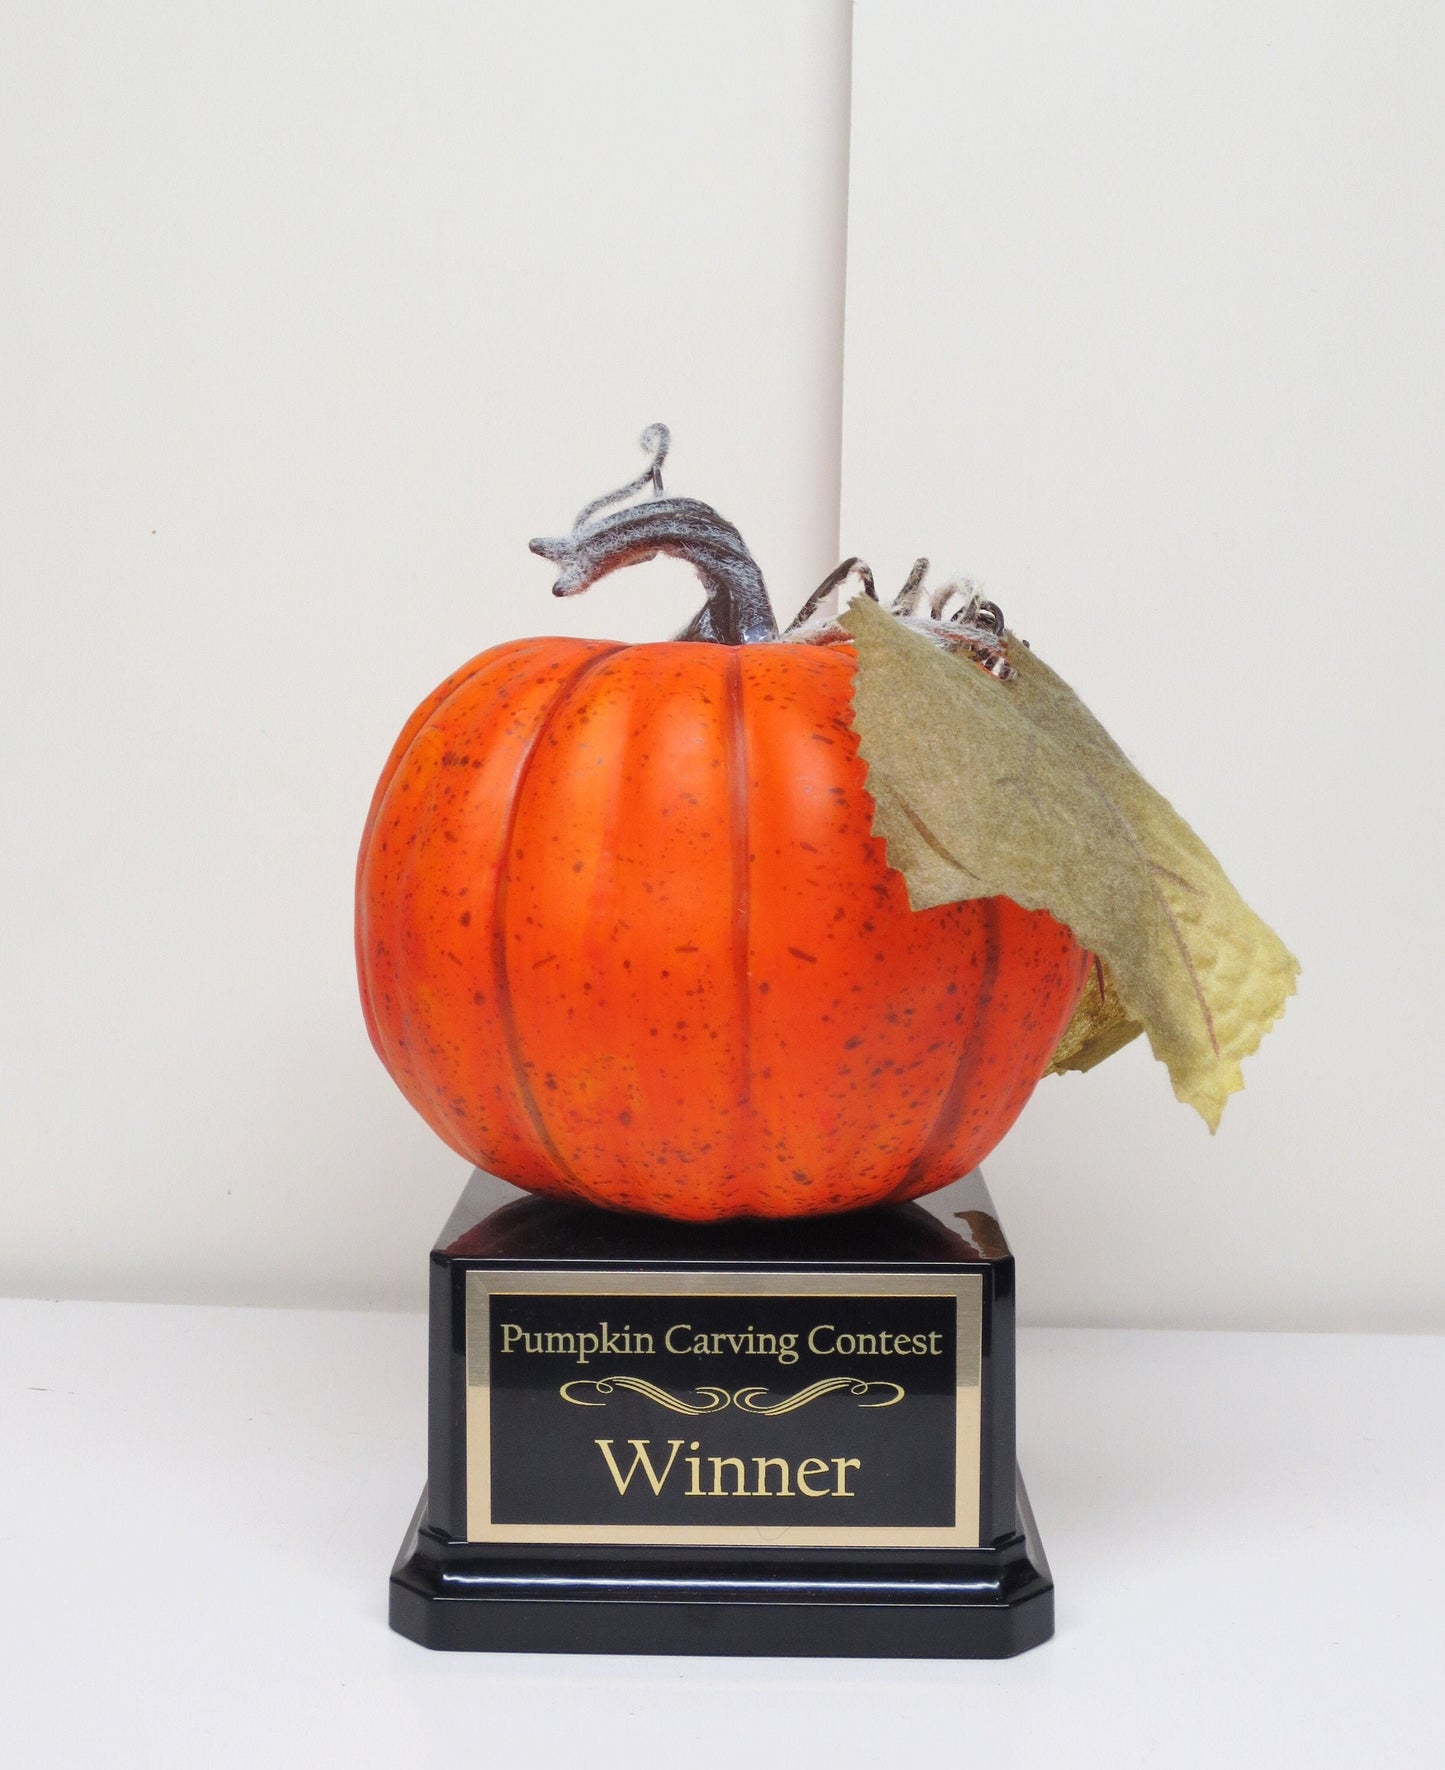 Halloween Trophy Rustic Speckled Pumpkin with Leaves Carving Contest Trophy or Best Costume Contest Jack O Lantern Halloween Decor